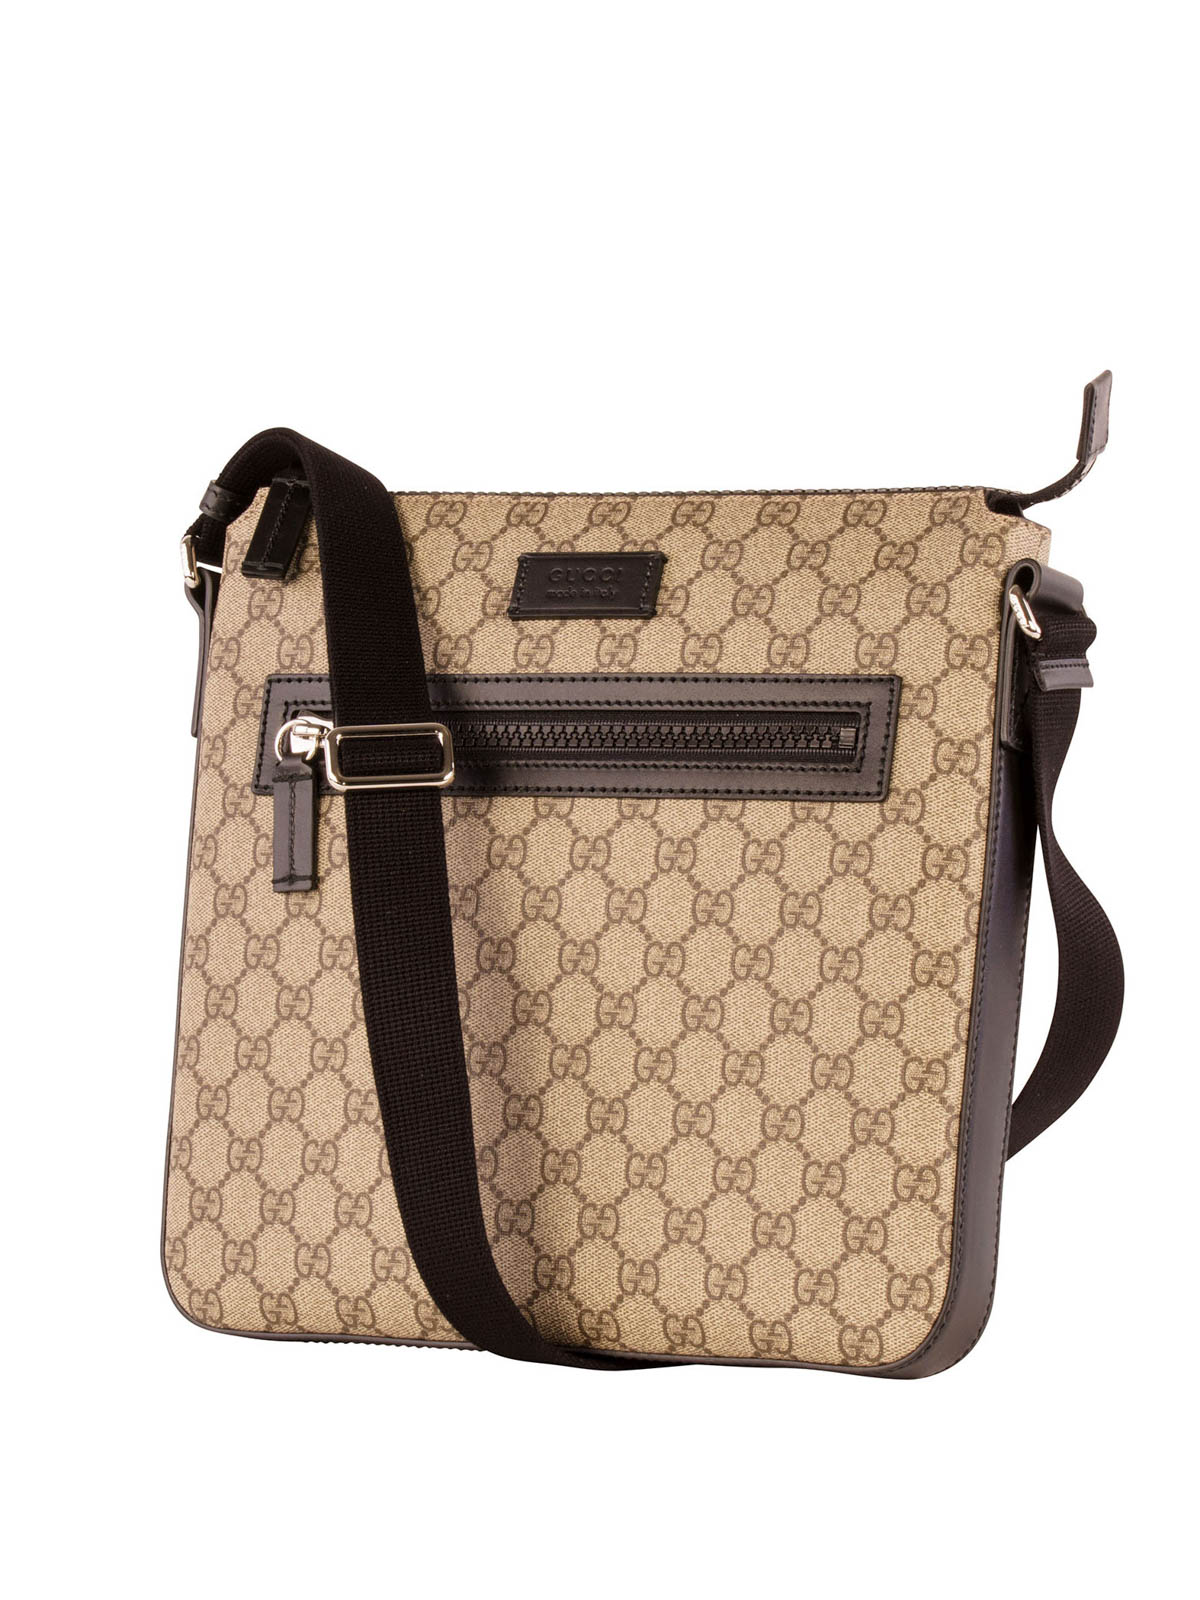 GG Supreme messenger bag by Gucci - cross body bags | Shop online at 0 - 406374 KHN7X 9772